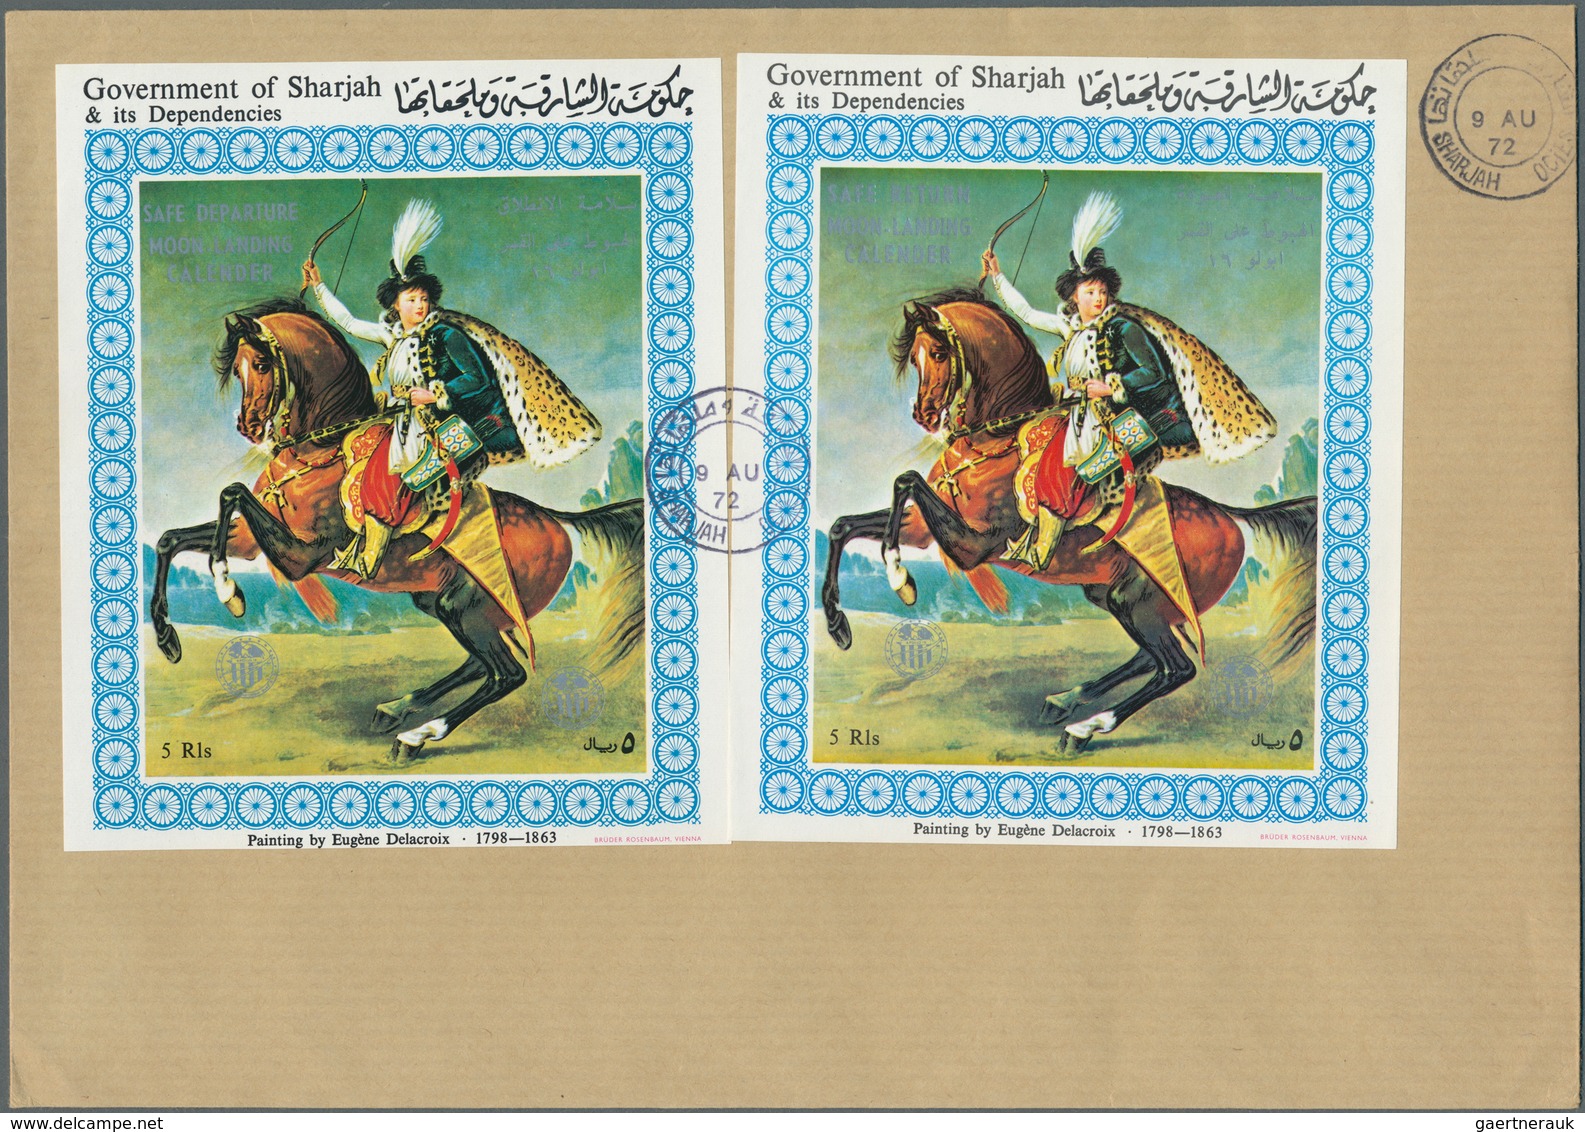 Asien: 1958/1972, ARAB STATES, group of 14 covers (mainly unaddressed envelopes) comprising Yemen, R